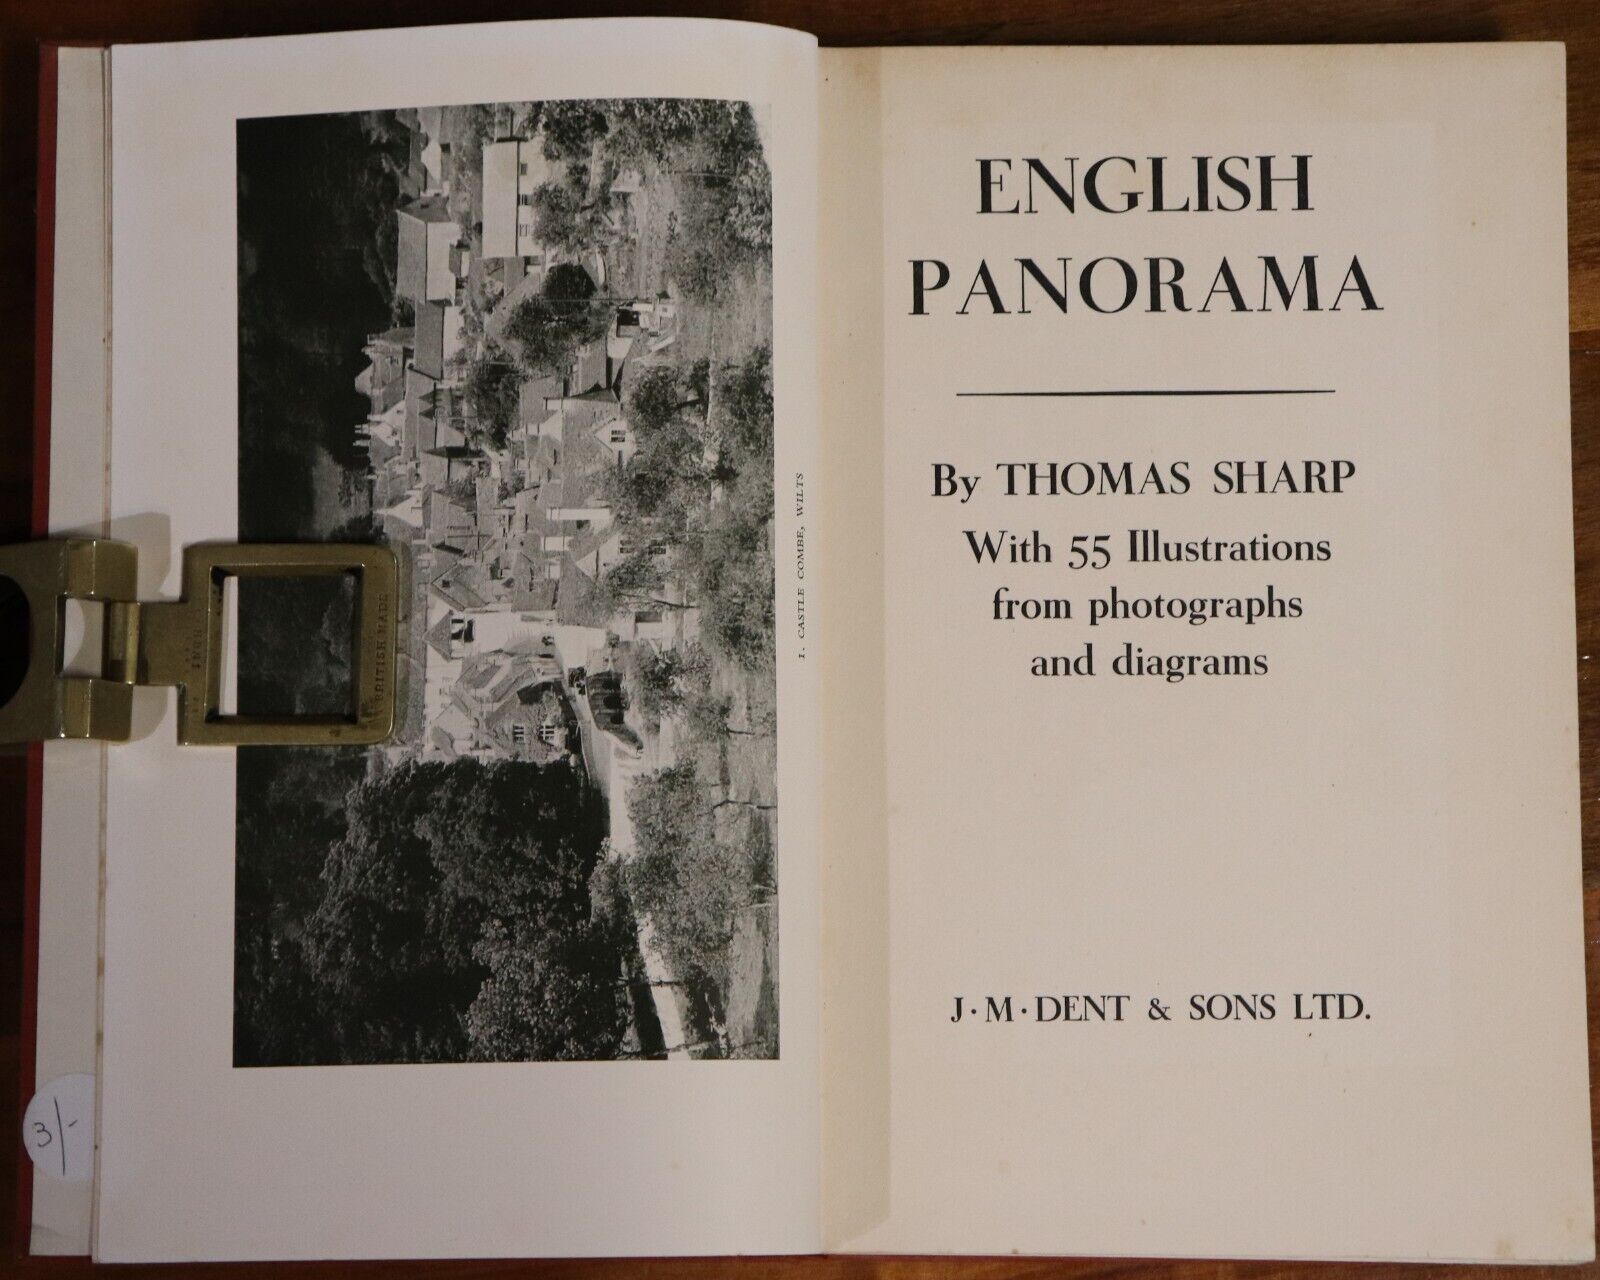 English Panorama by Thomas Sharp - 1936 - 1st Edition Antique Architecture Book - 0